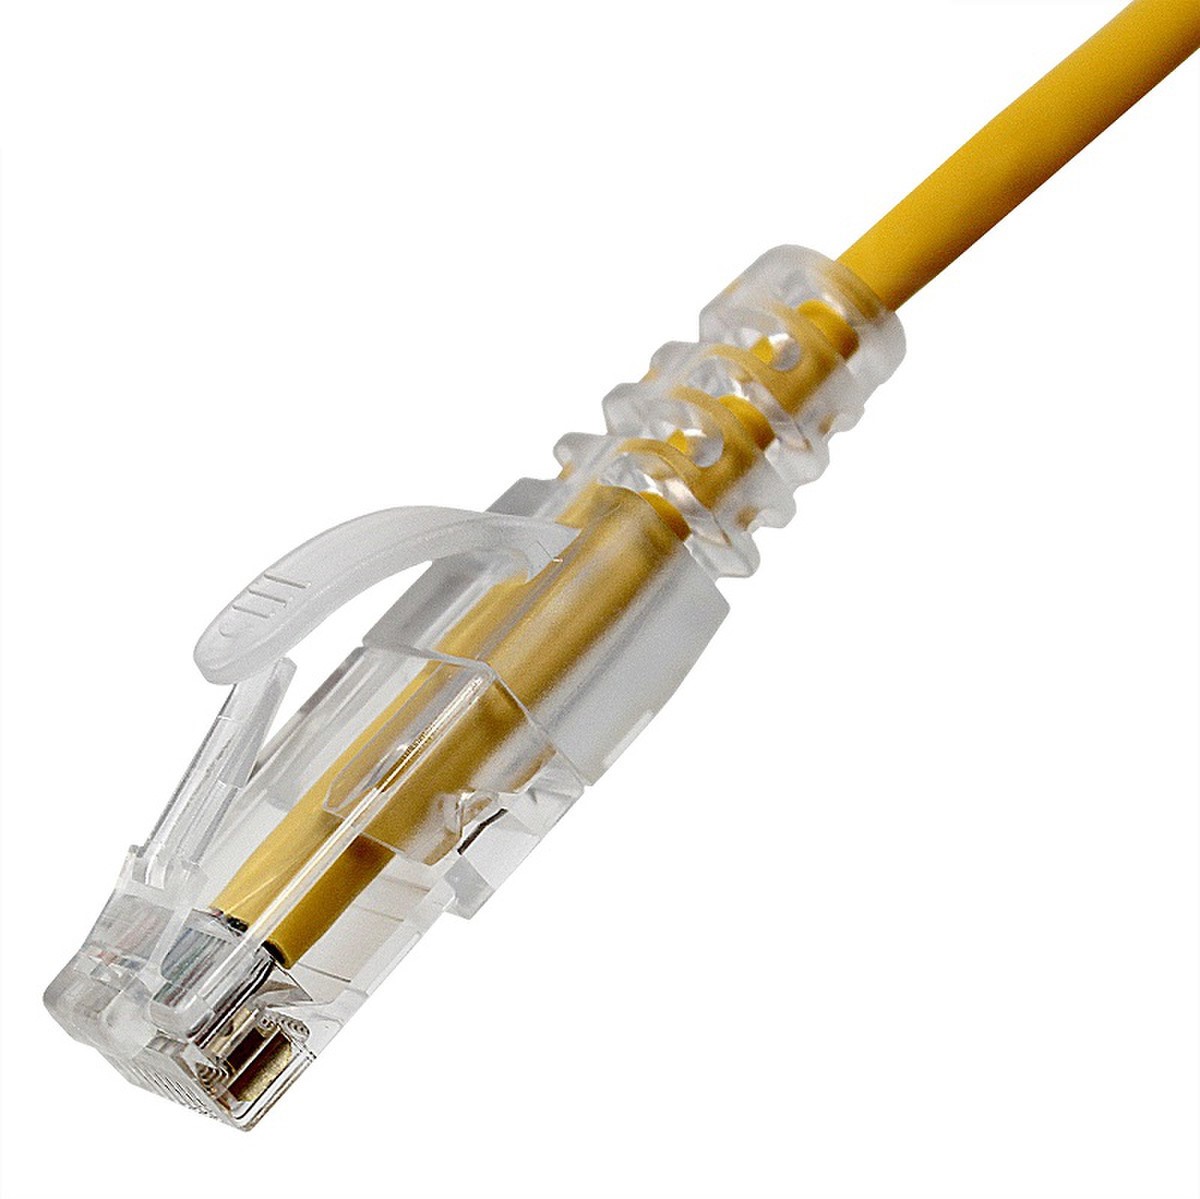 Black-Stone Cat6 UTP Patch cord, 3ft, Yellow - BSUS3F600-YL-CM     